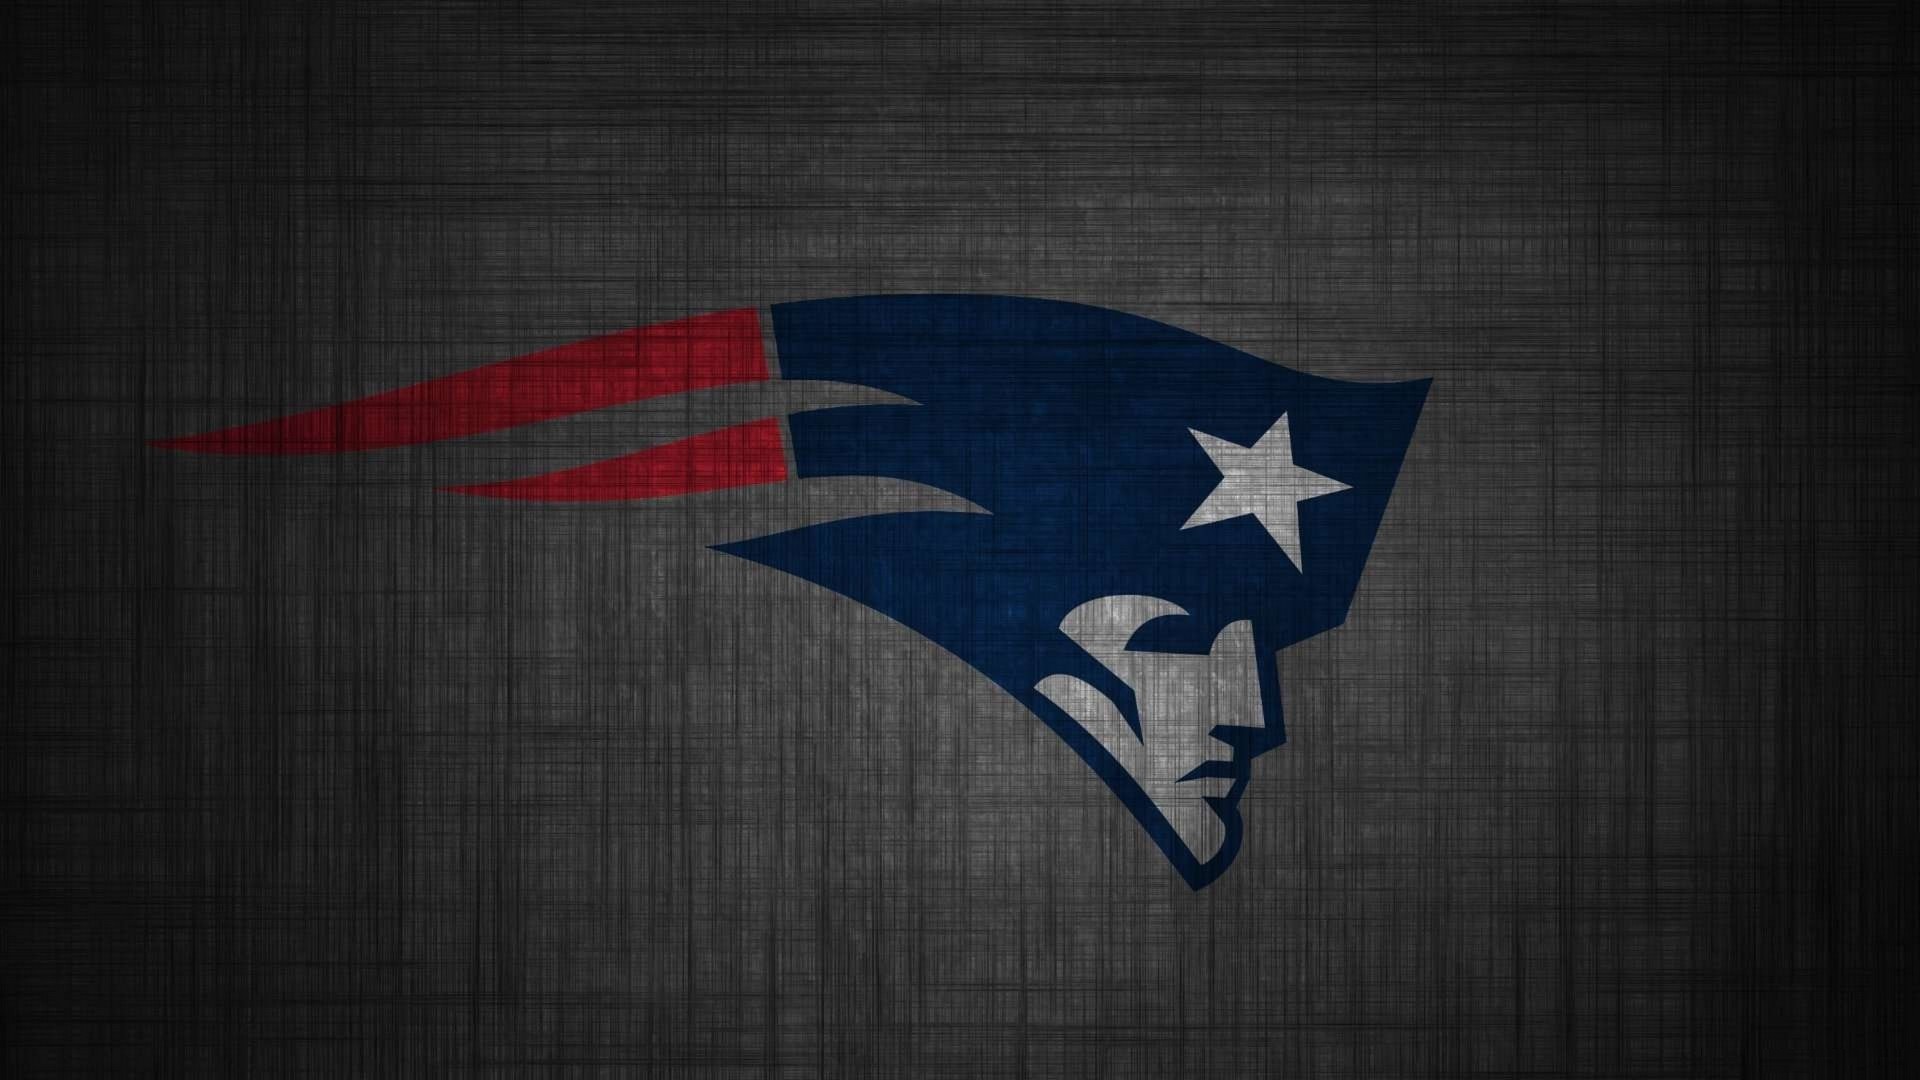 New England Patriots NFL Wallpaper For Mac OS With high-resolution 1920X1080 pixel. Download and set as wallpaper for Desktop Computer, Apple iPhone X, XS Max, XR, 8, 7, 6, SE, iPad, Android